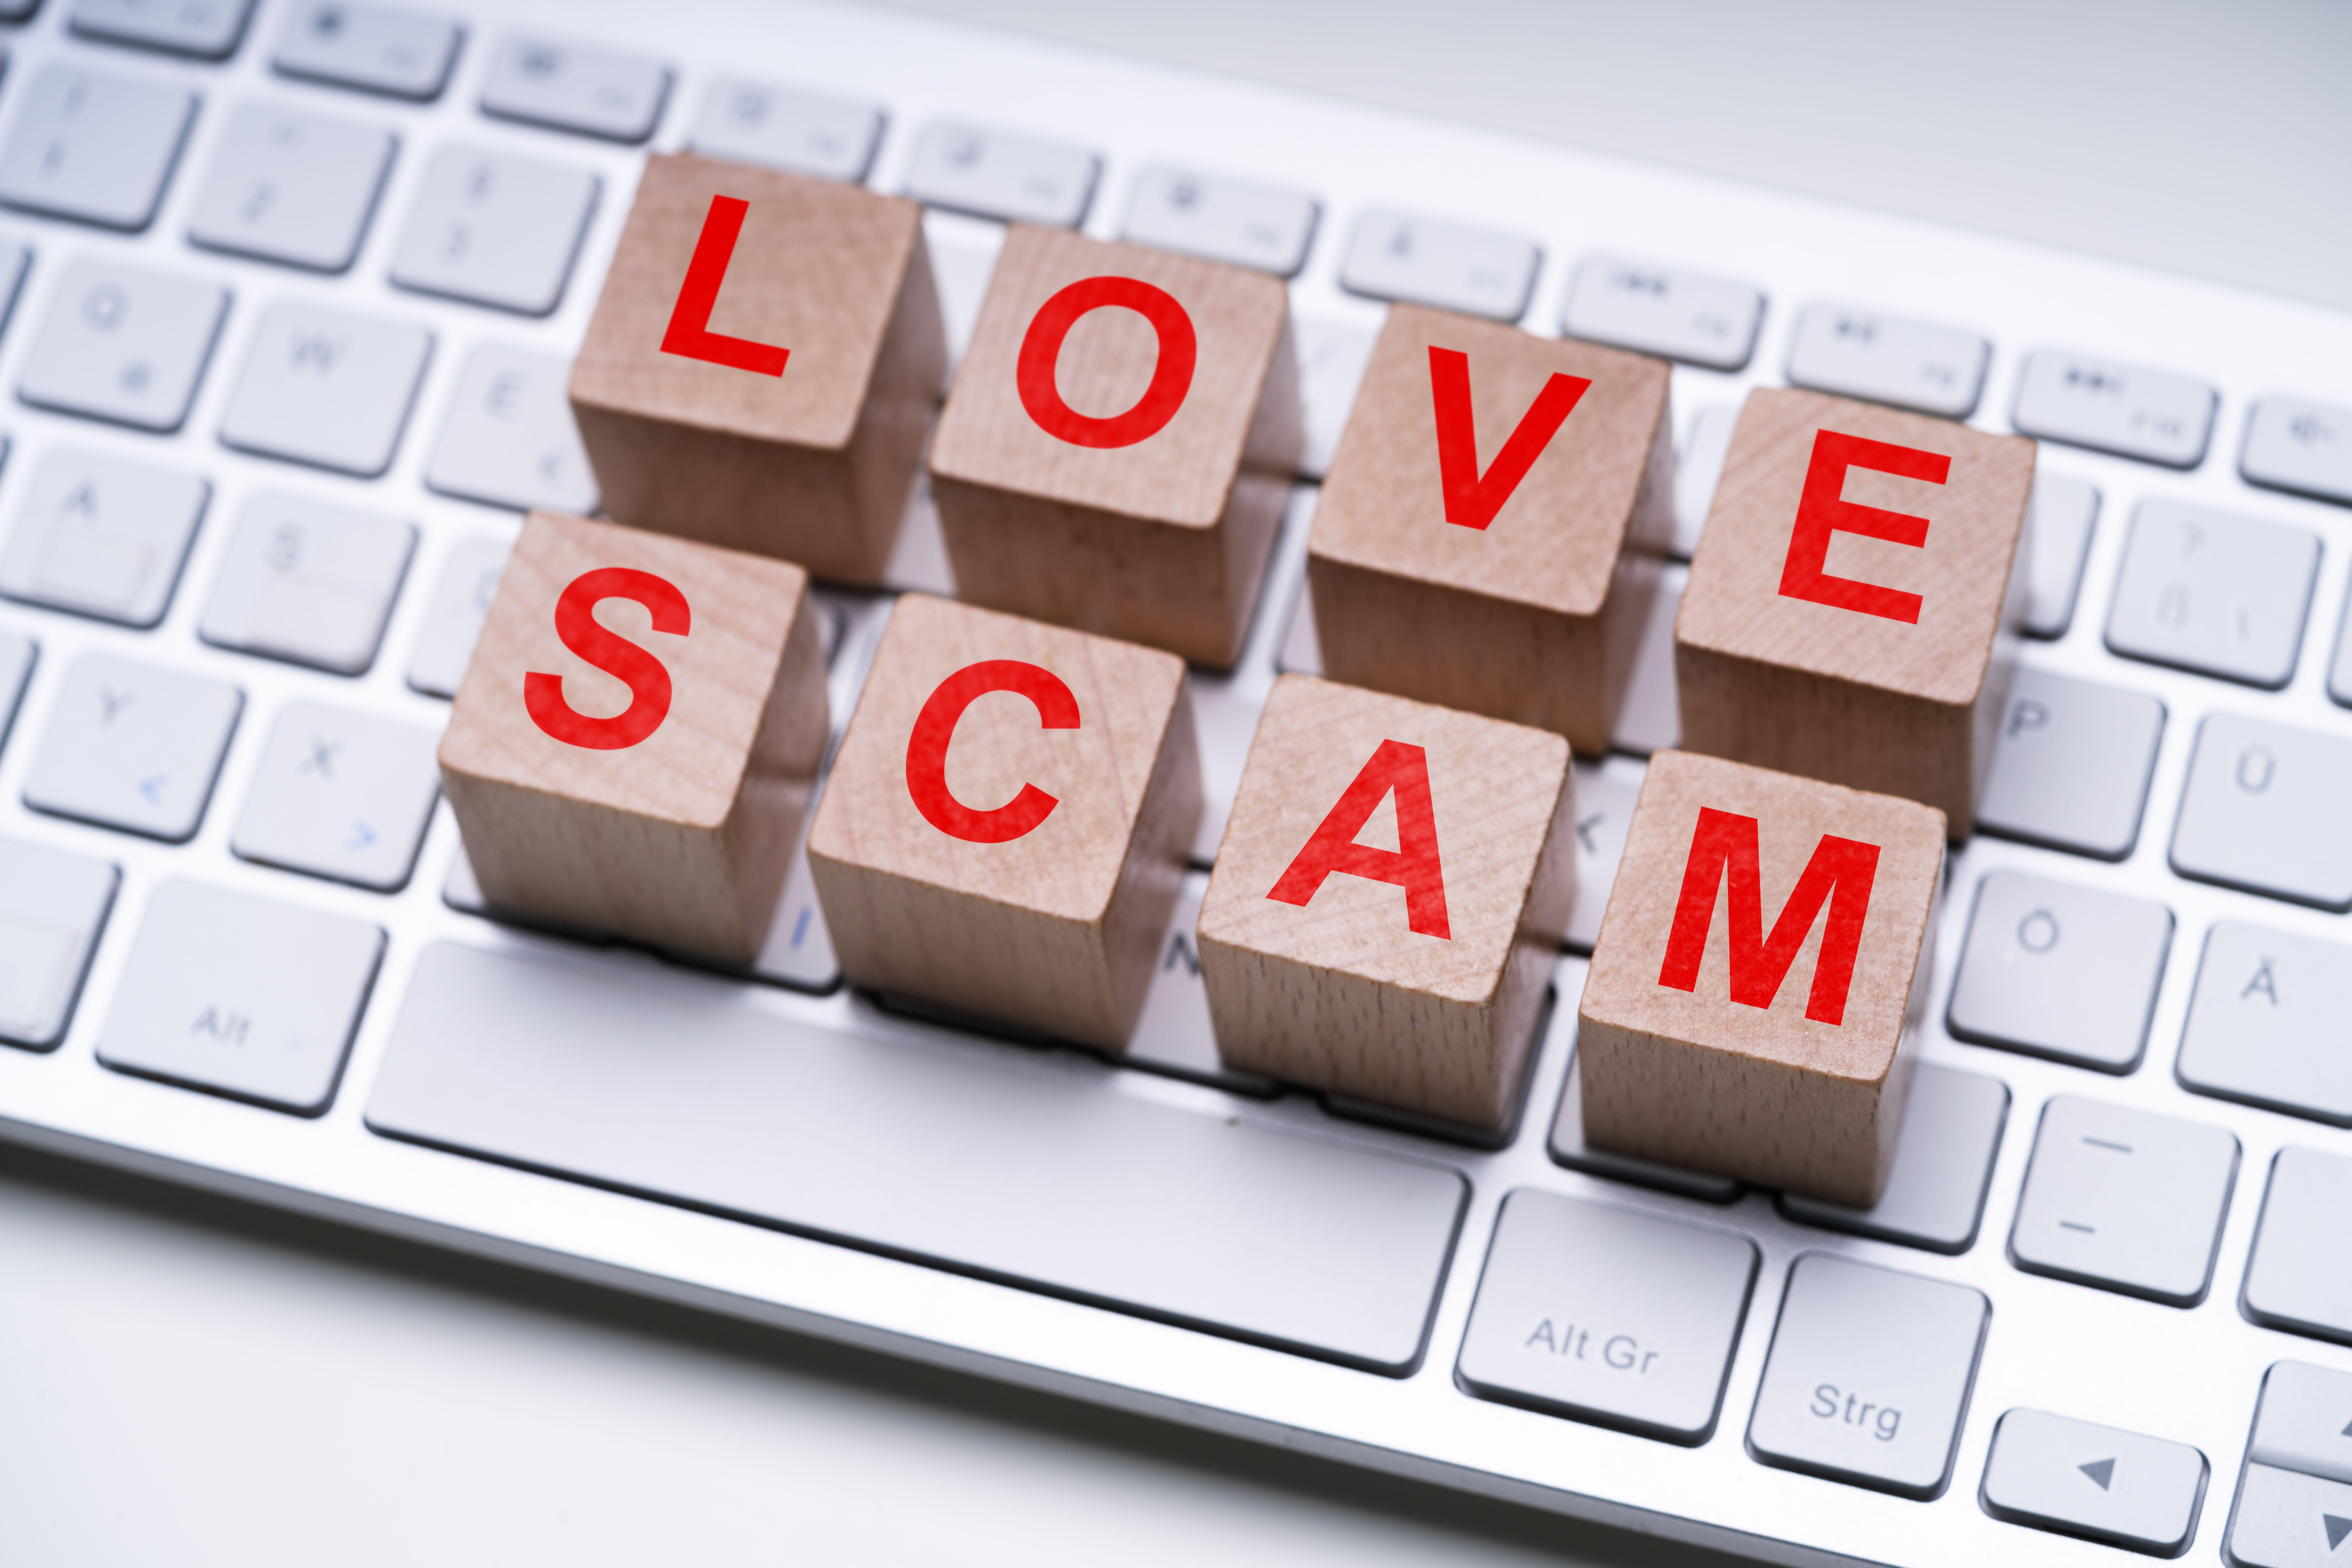 'Love scam' on a keyboard